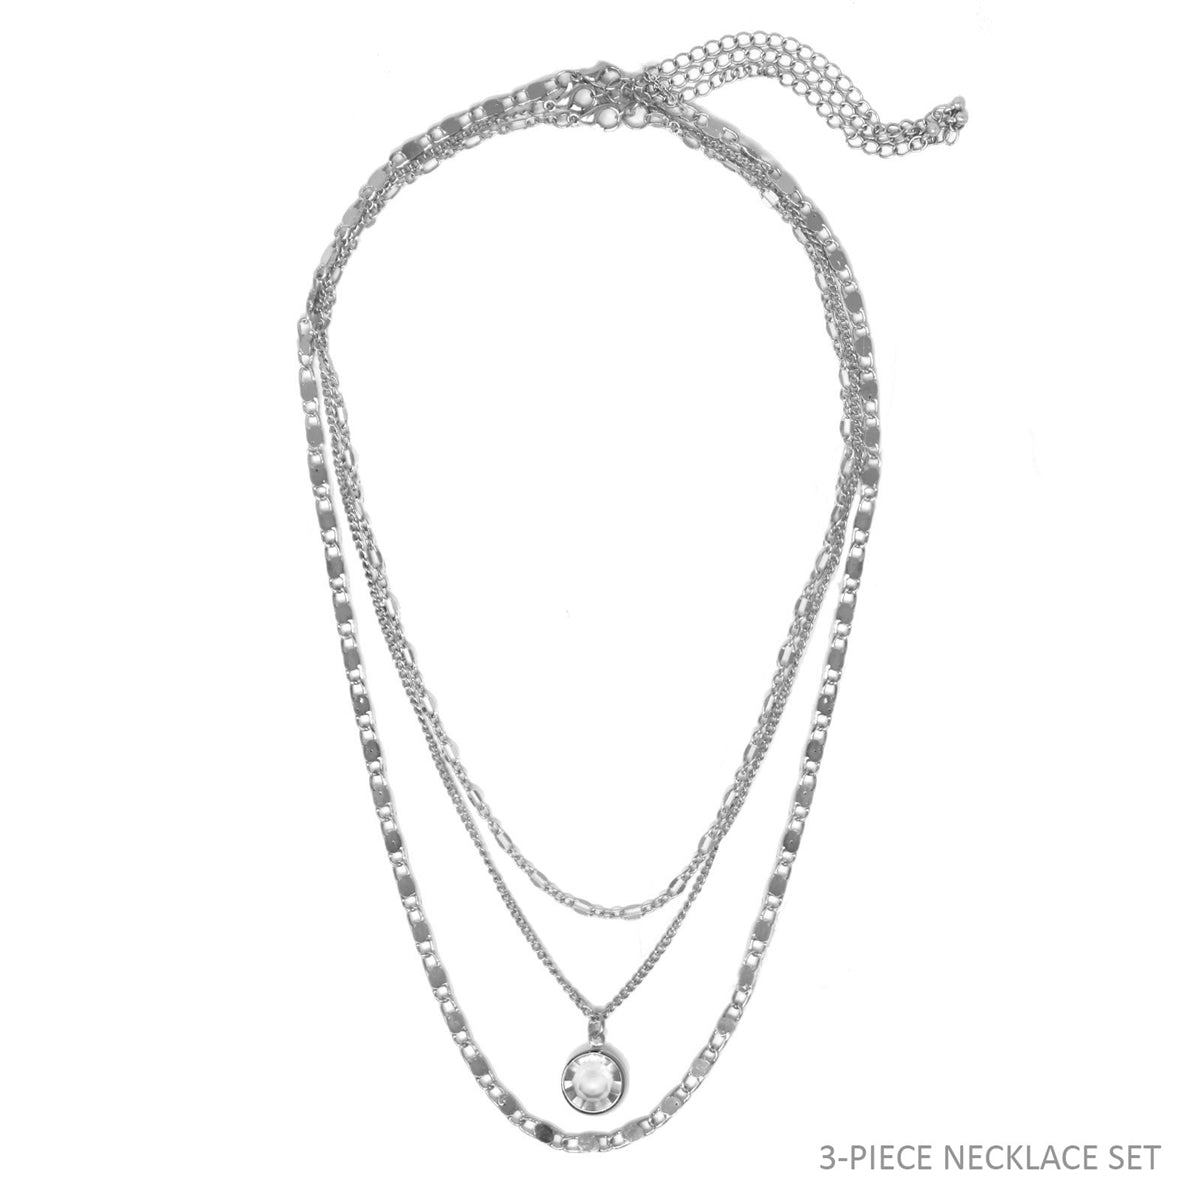 Triple Layered Chain with Crystal Necklace